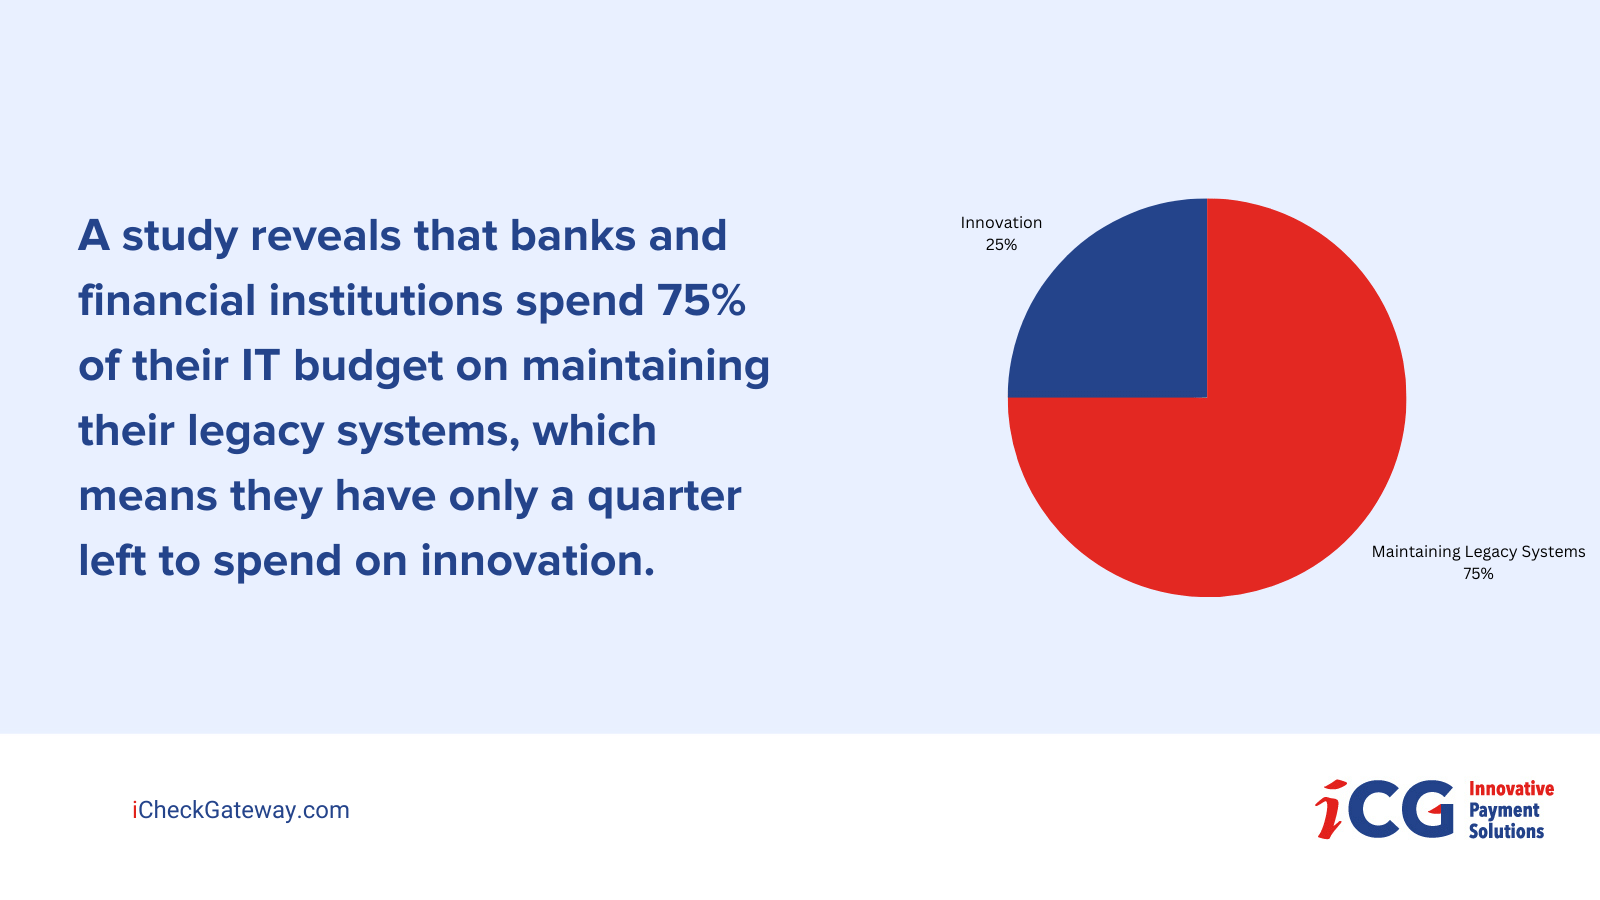 A study reveals that banks and financial institutions spend 75% of their IT budget on maintaining their legacy systems, which means they have only a quarter left to spend on innovation